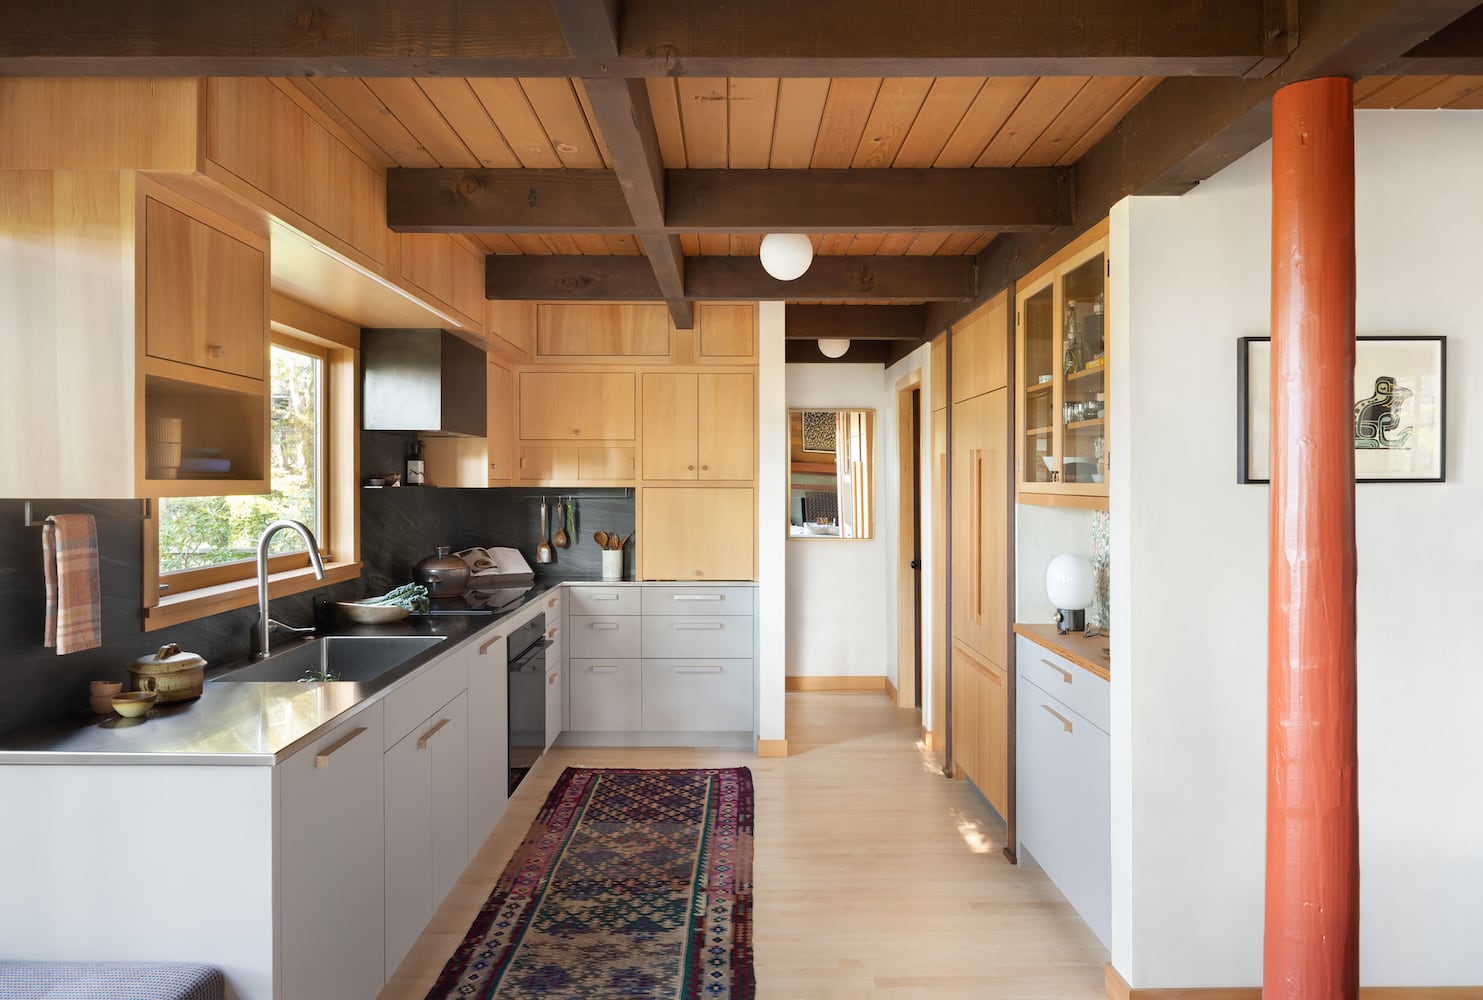 The kitchen remodel retains the original character while adding modern touches